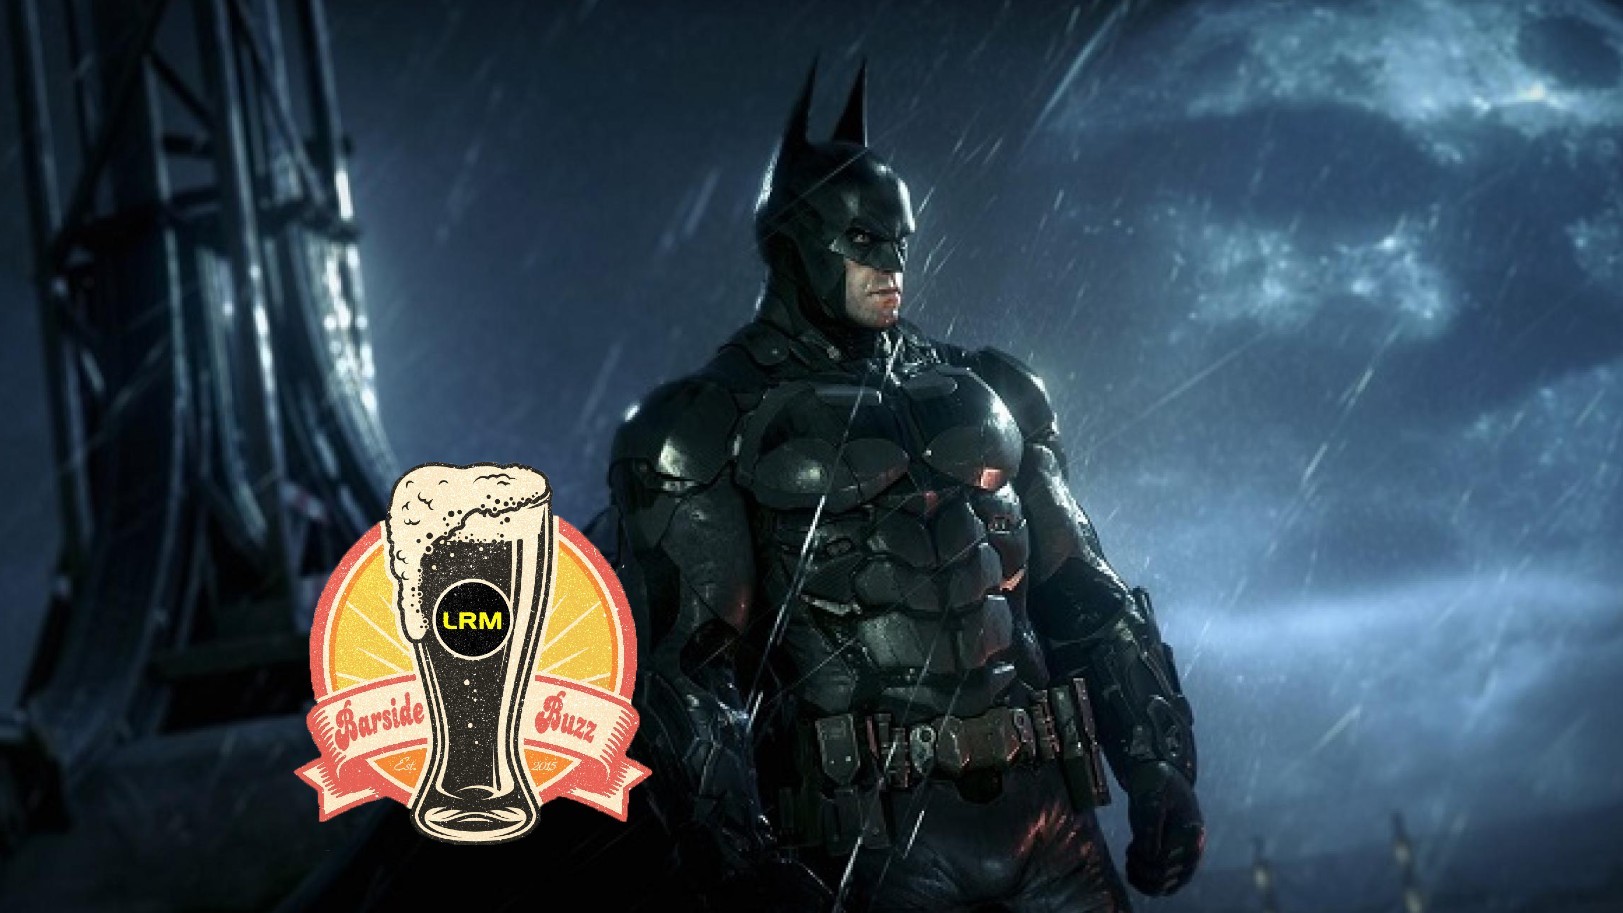 A New Batman Game Could Be Announced And Released Sooner Than We Think | LRM’s Barside Buzz